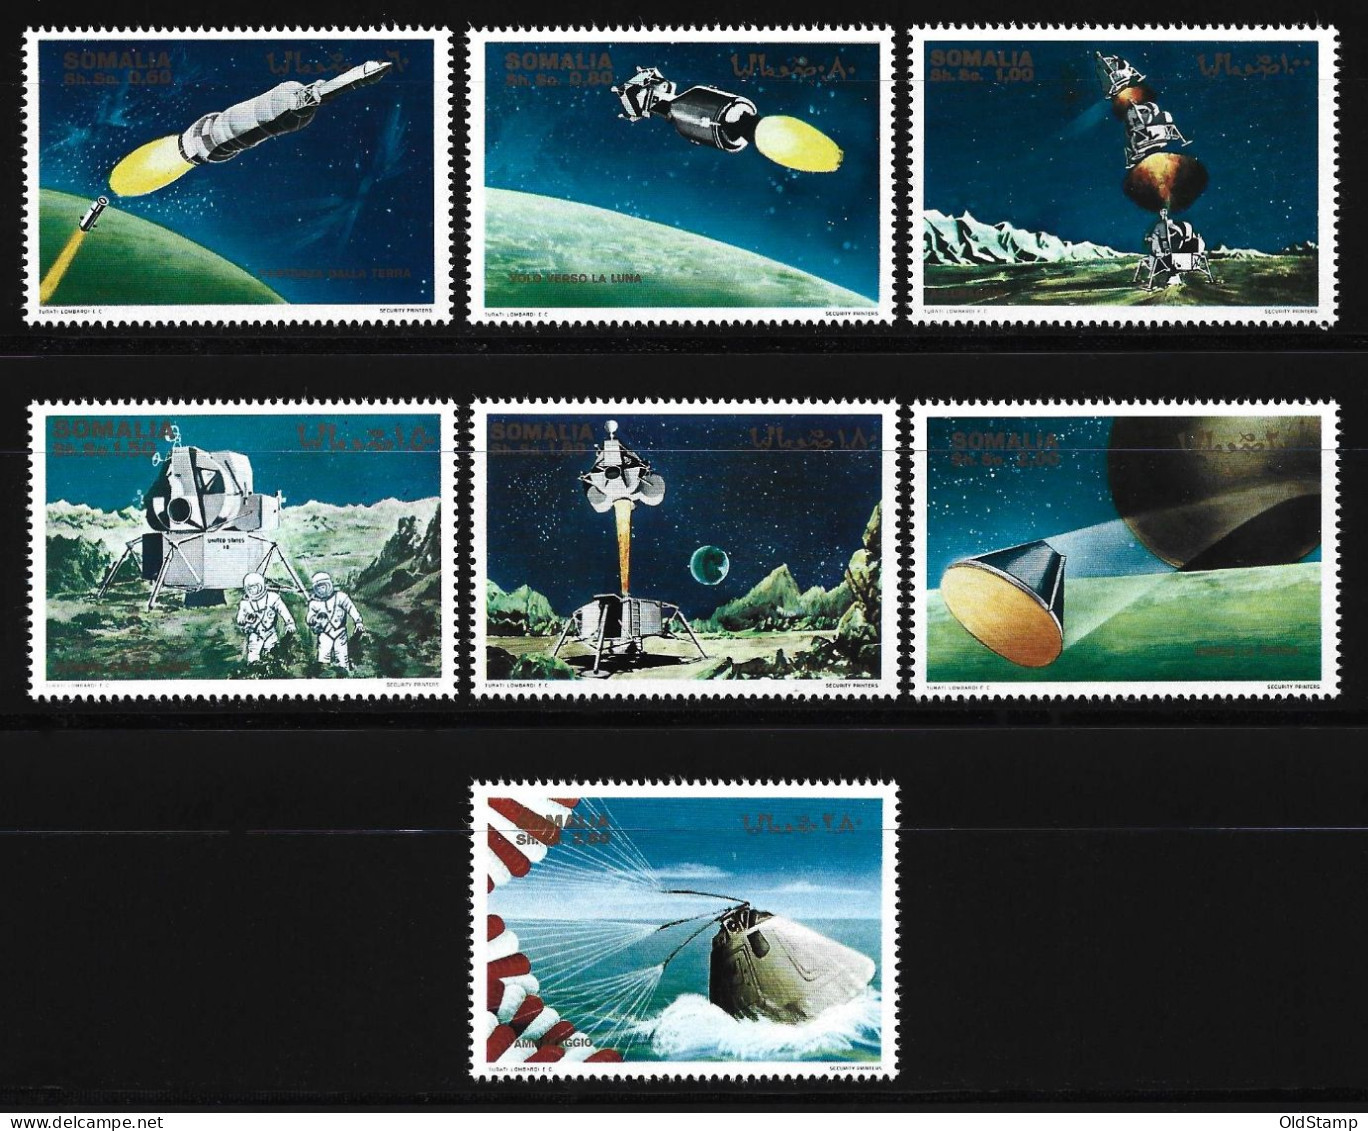 SPACE Somalia SPACE SPACESHIP PLANET ASTRONAUT STAR MNH LUXE Africa Stamps FULL SET - Collezioni